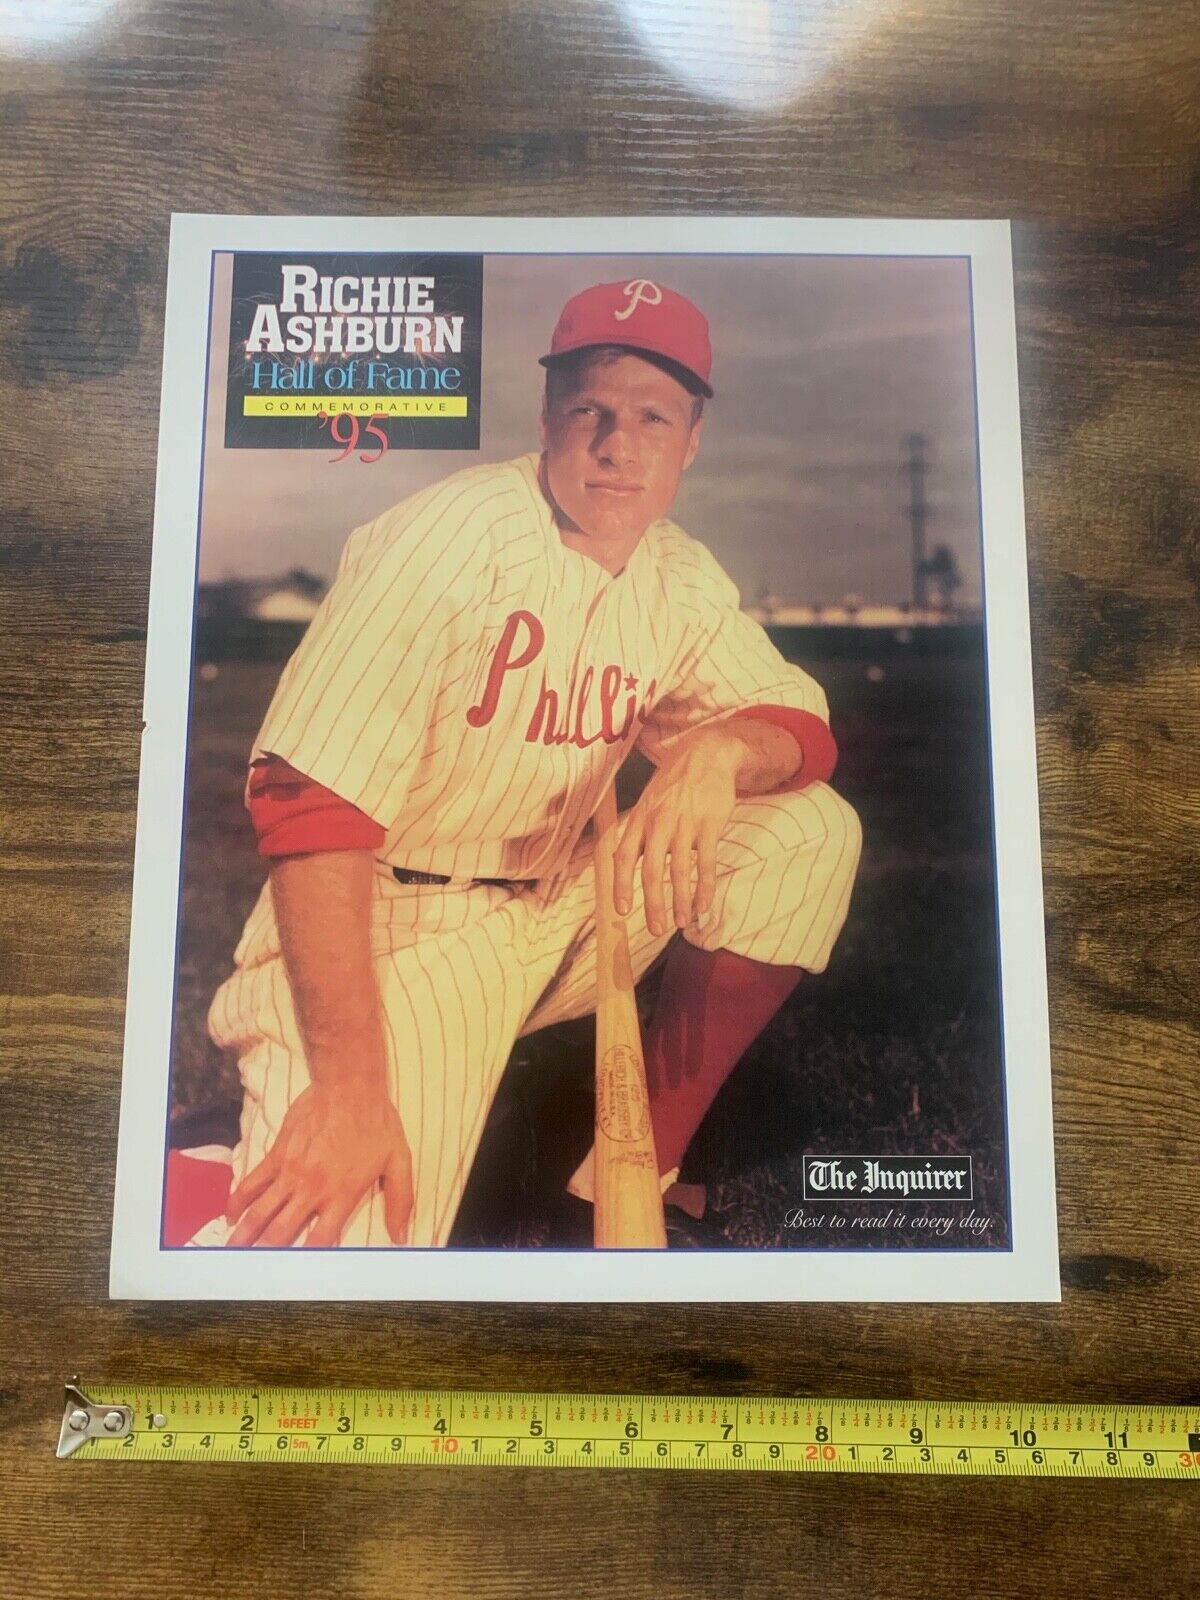 Richie Ashburn 1995 Hall of Fame 11x13 Philadelphia Phillies The Inquirer photo